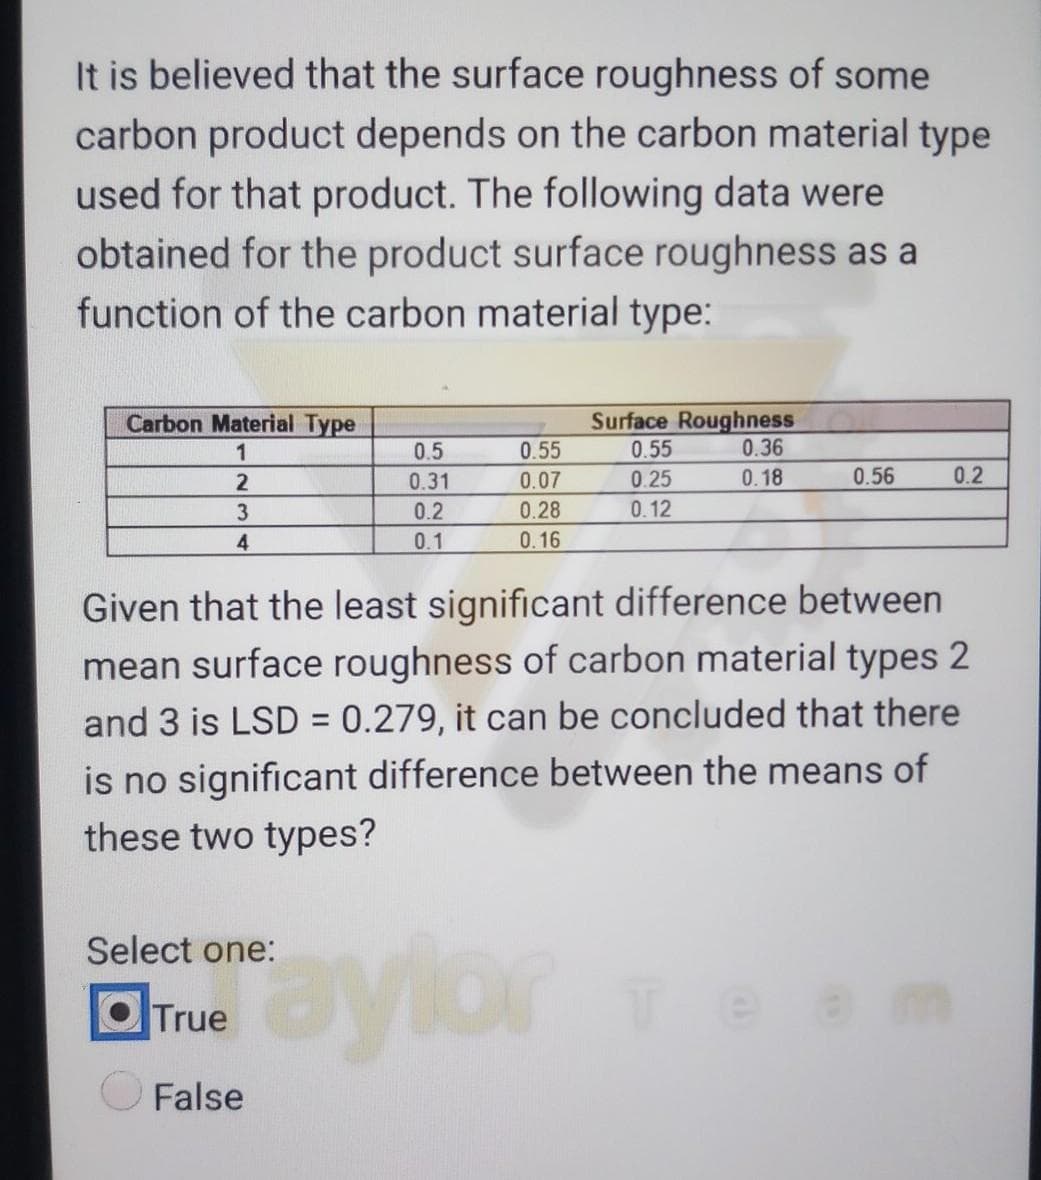 It is believed that the surface roughness of some
carbon product depends on the carbon material type
used for that product. The following data were
obtained for the product surface roughness as a
function of the carbon material type:
Carbon Material Type
Surface Roughness
0.55
1
0.5
0.55
0.36
0.31
0.07
0.25
0.18
0.56
0.2
0.2
0.28
0.12
4
0.1
0.16
Given that the least significant difference between
mean surface roughness of carbon material types 2
and 3 is LSD = 0.279, it can be concluded that there
is no significant difference between the means of
these two types?
oylor
Select one:
Team
True
False
